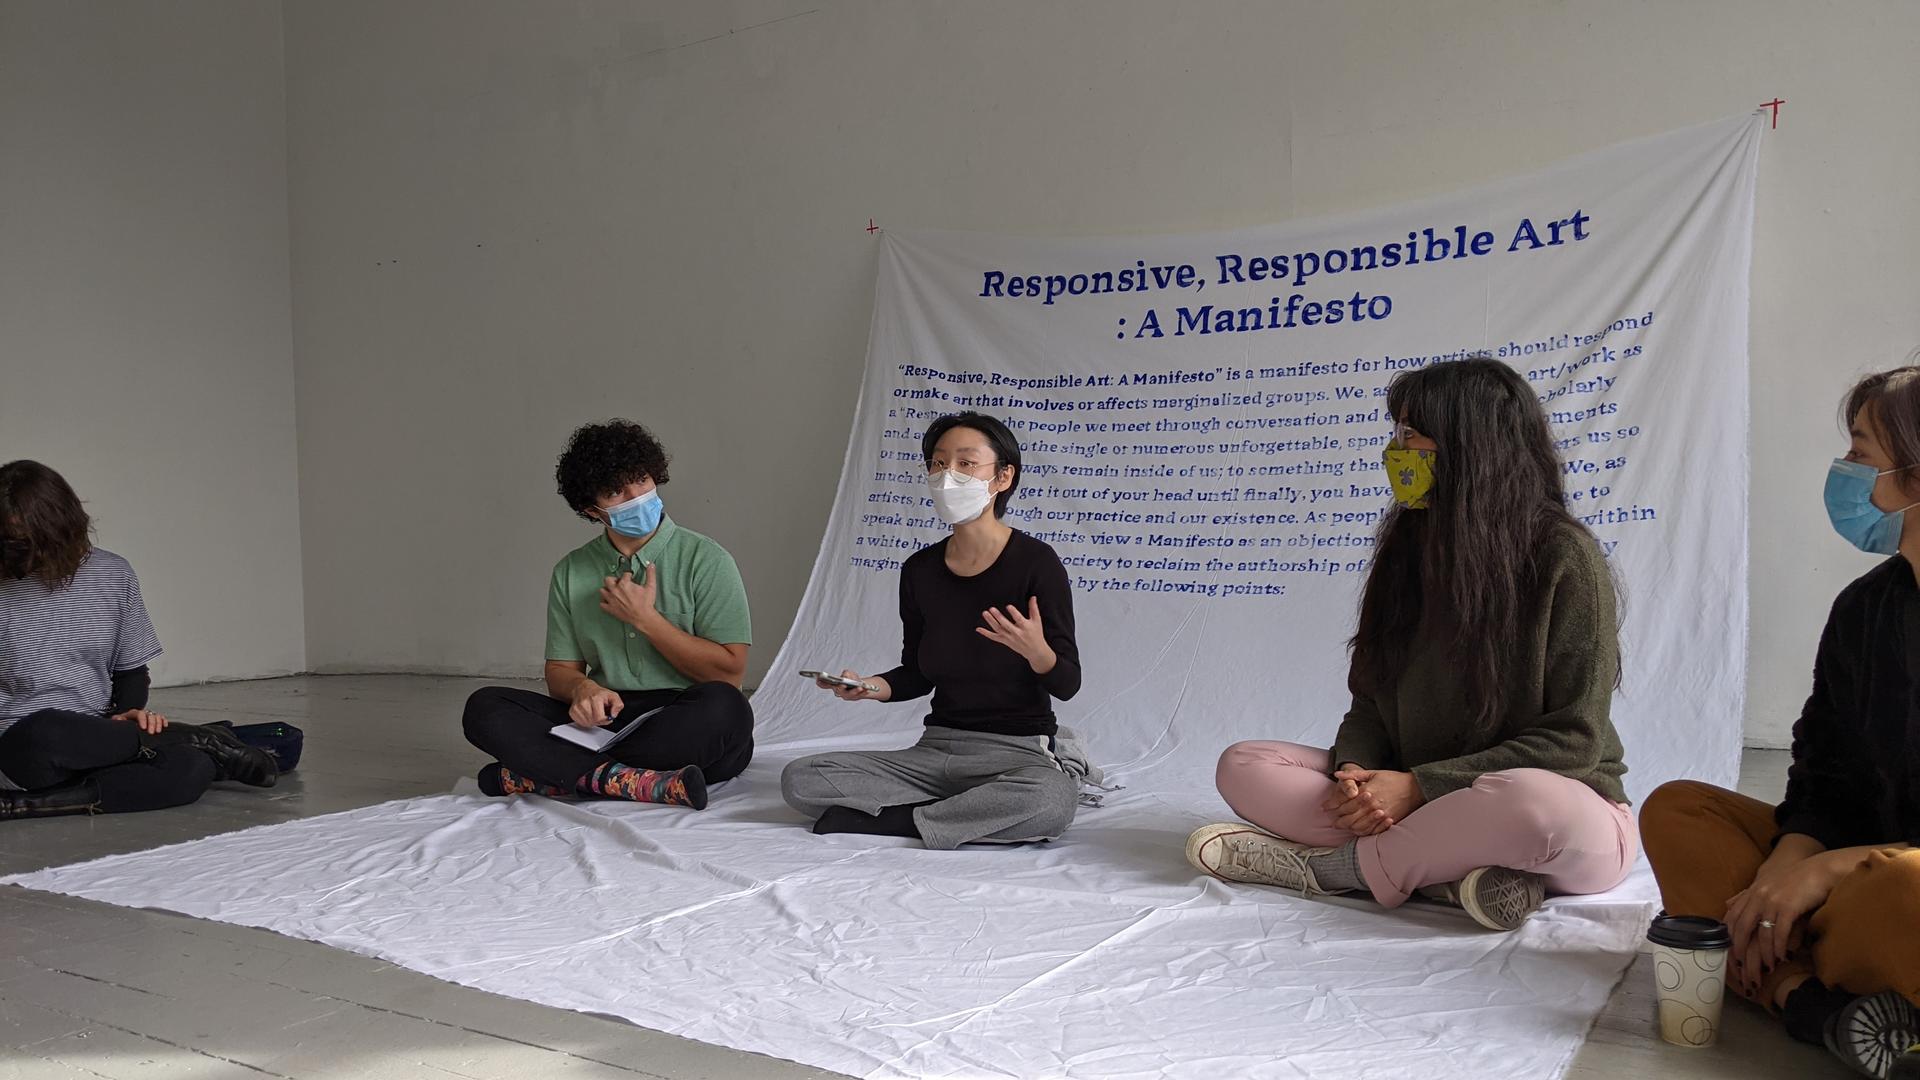 Artist reading “Responsive, Responsible Art: A Manifesto” on her phone while seated in a circle with four people on a large white fabric cascading down from the wall, featuring a handwritten paragraph from the manifesto in vivid blue paint.